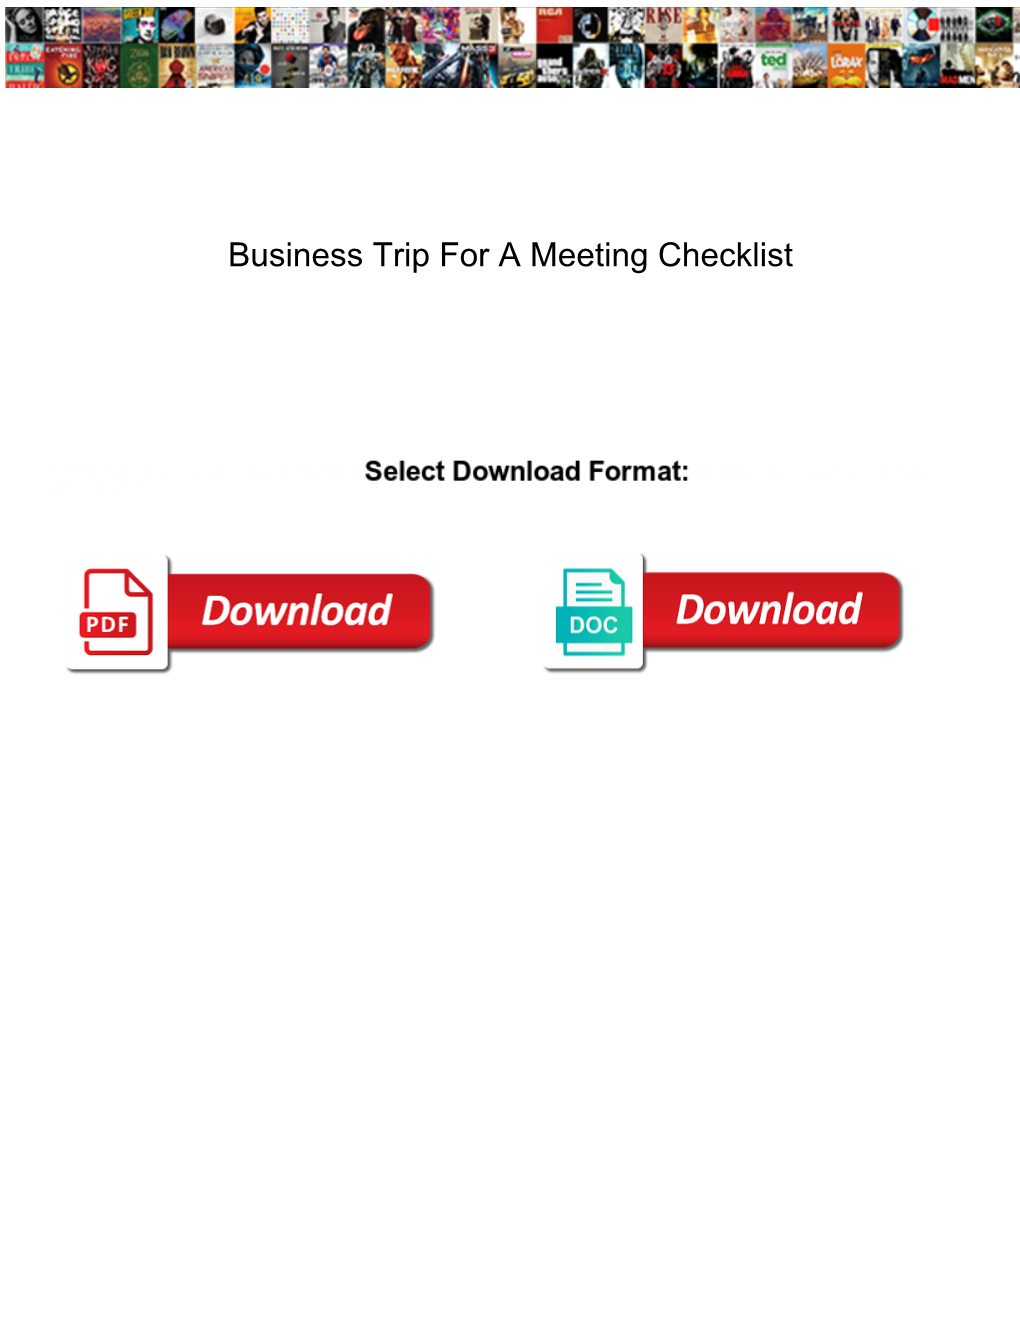 Business Trip for a Meeting Checklist